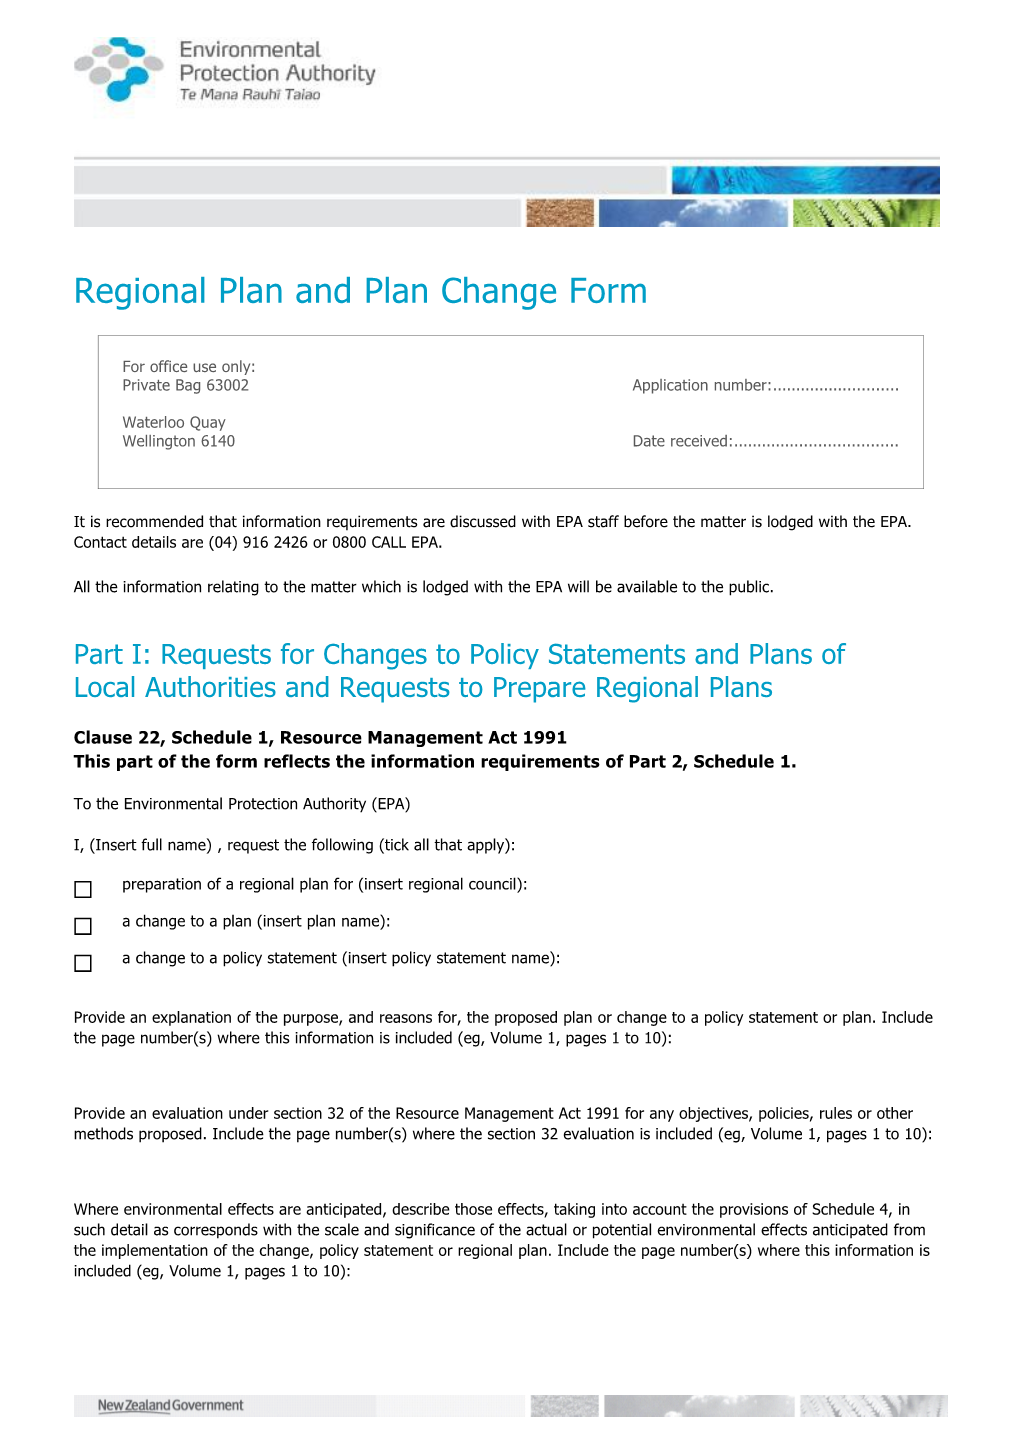 Application Form for Regional Plan and Plan Changefinalweb(Changes-EPA)